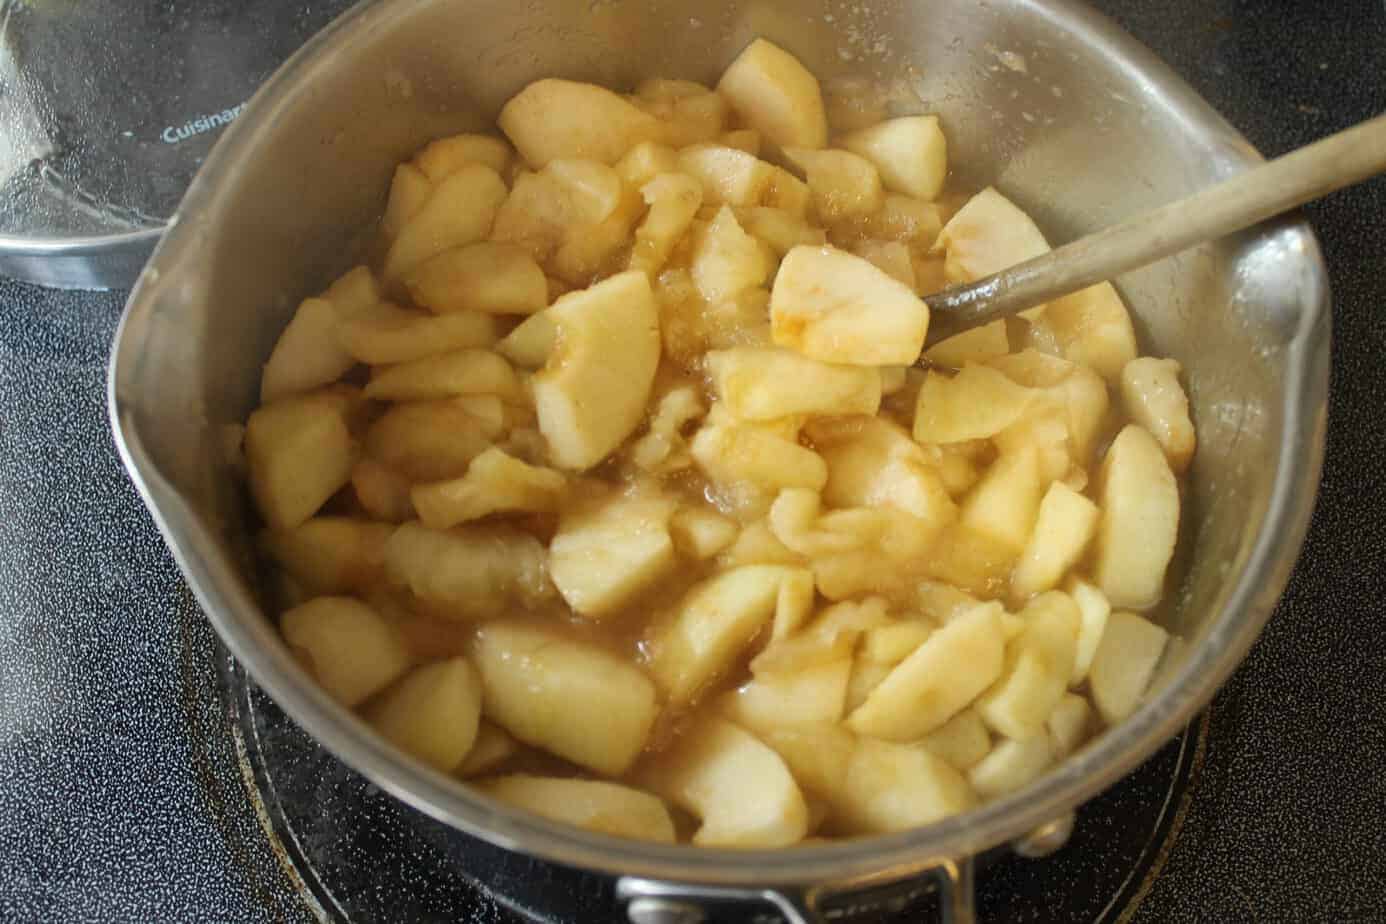 Apples cooking in a pot to make apple pie filling